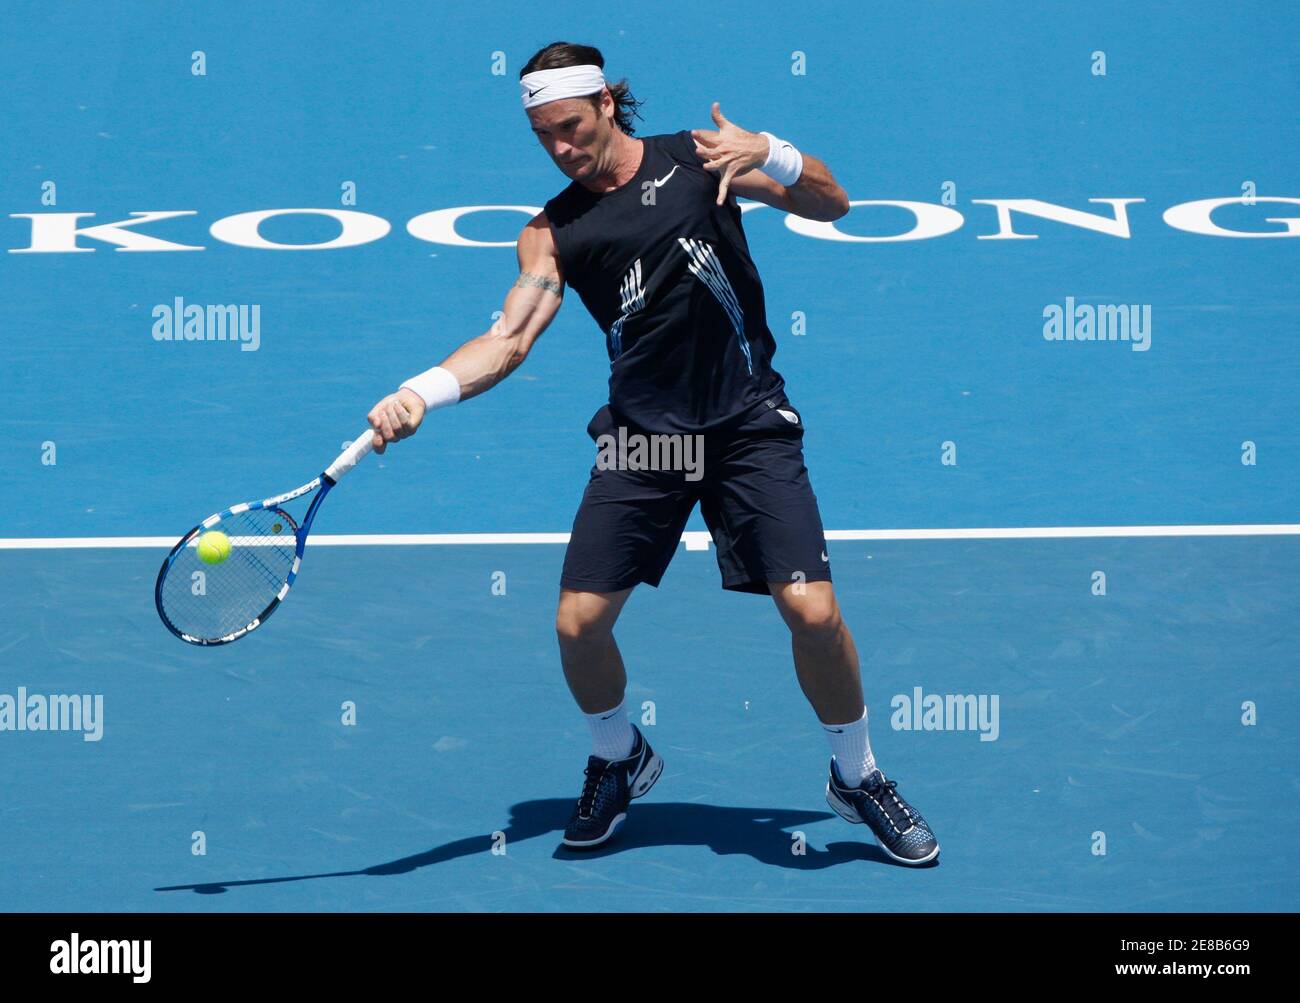 Spain's Carlos Moya hits a forehand to Switzerland's Roger Federer at the Kooyong  Classic tennis tournament in Melbourne January 14, 2009. REUTERS/Mick  Tsikas (AUSTRALIA Stock Photo - Alamy